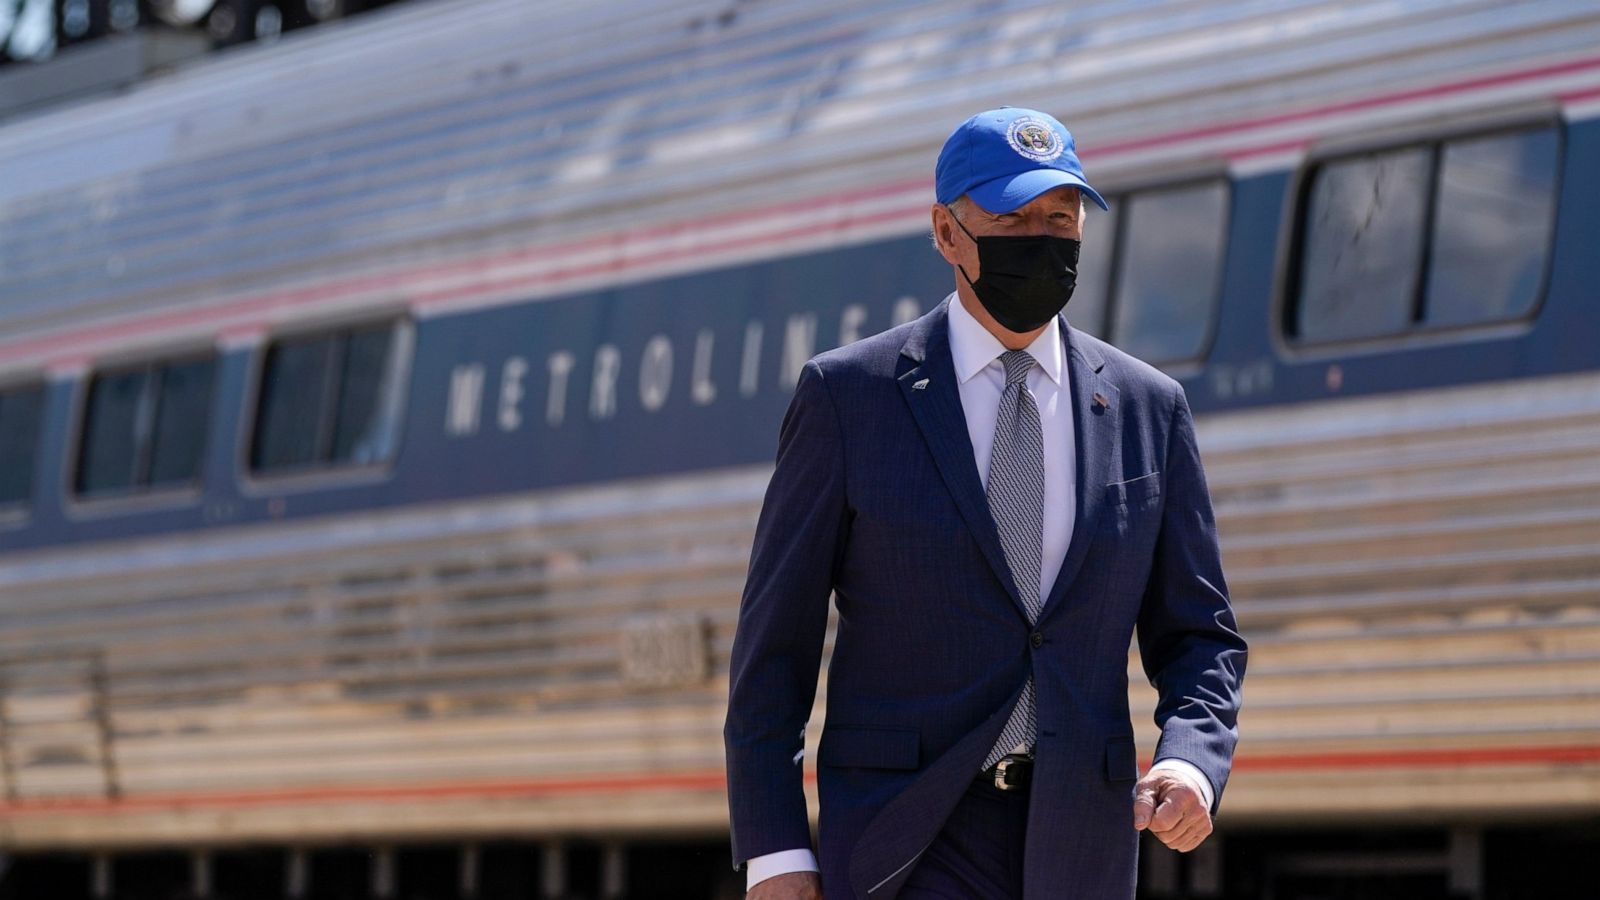 Advisers tell Biden to still wear masks outside to encourage public to follow suit